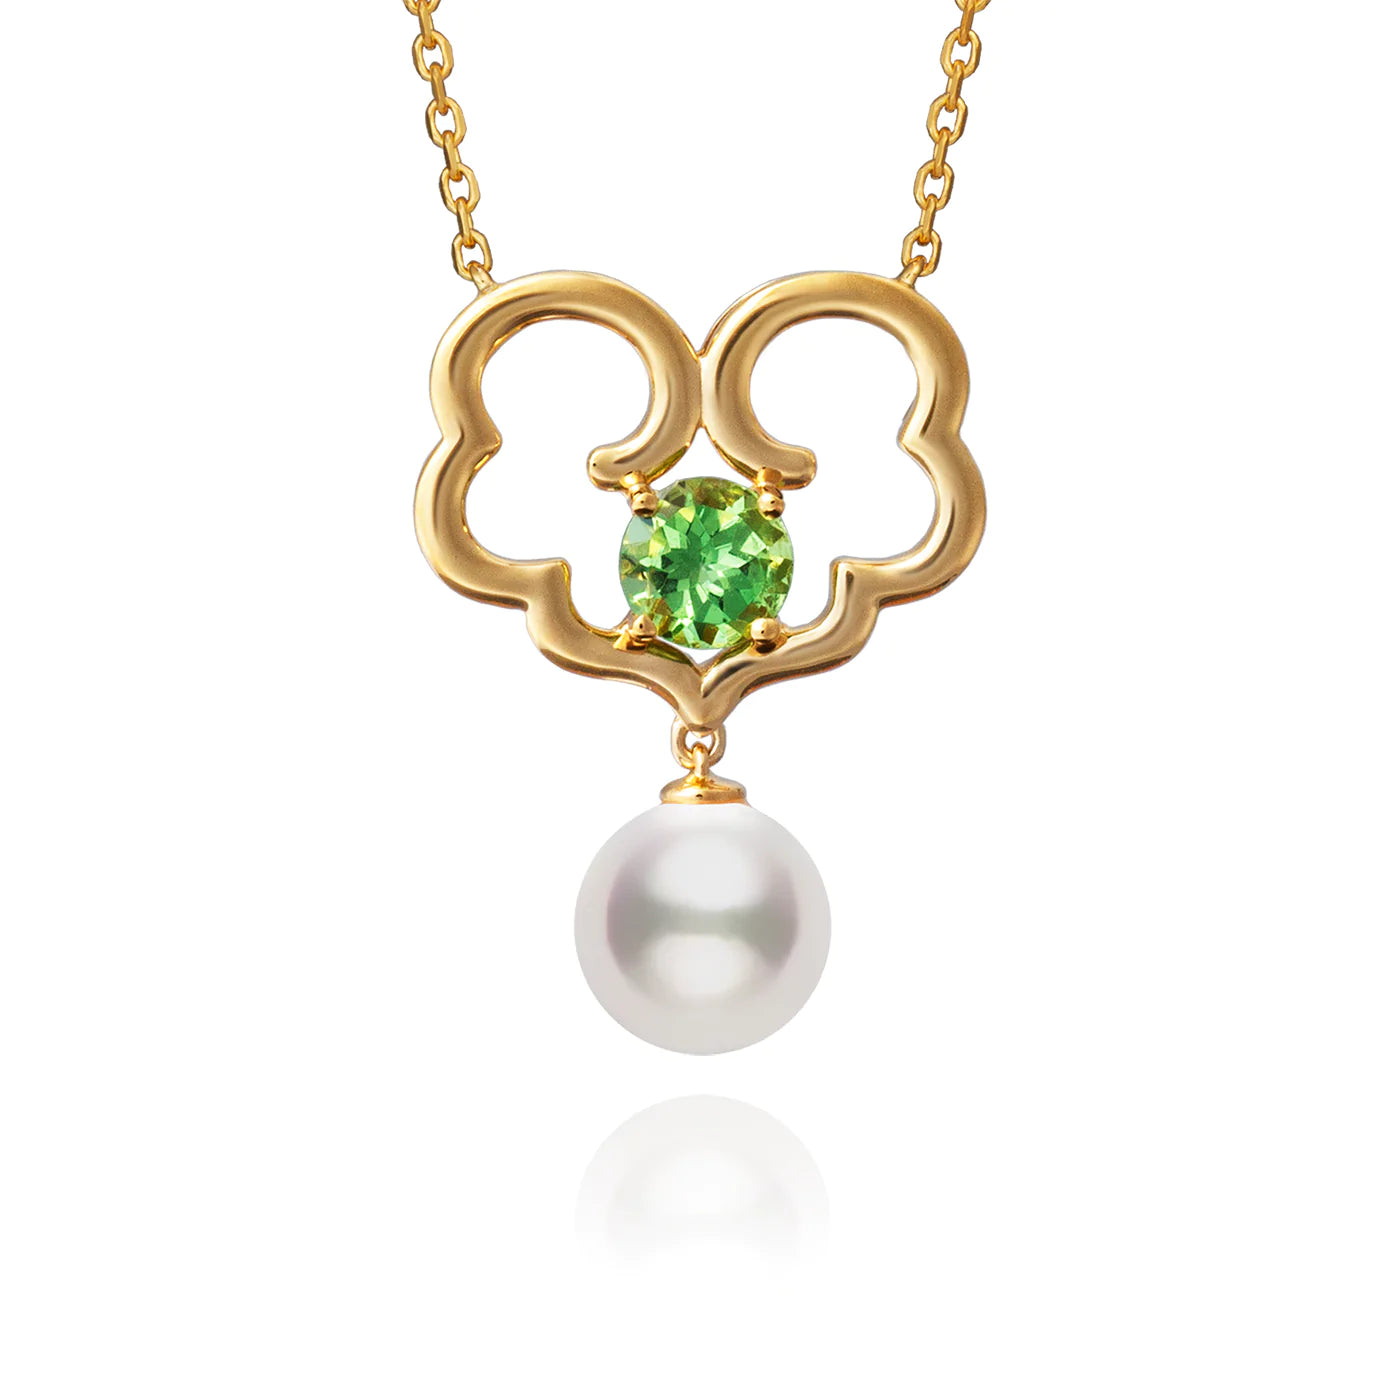 The Timeless Blessings - Fine Jewelry Necklace with Tsavorite